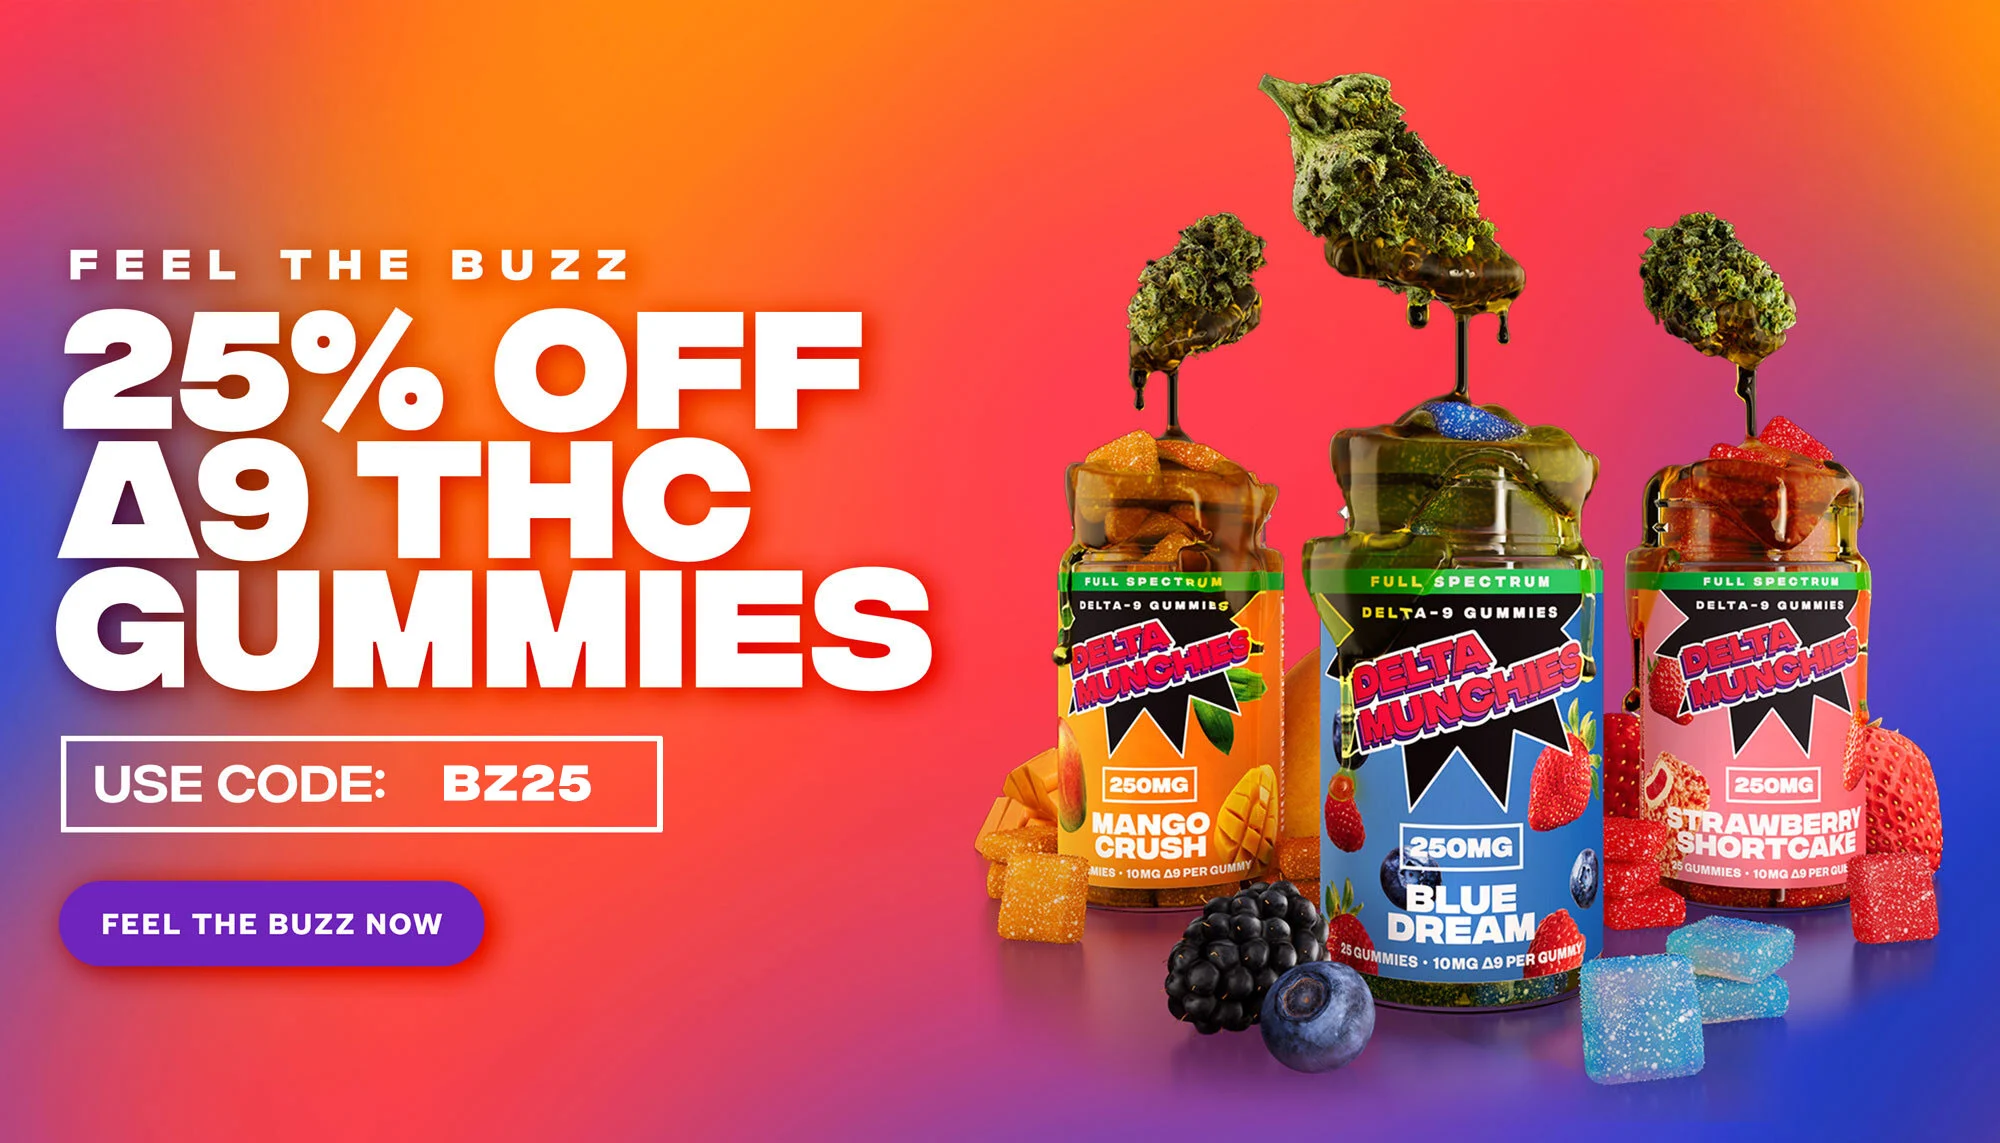 Feel the buzz. 25% off delta 9 thc gummies. Use code bz25